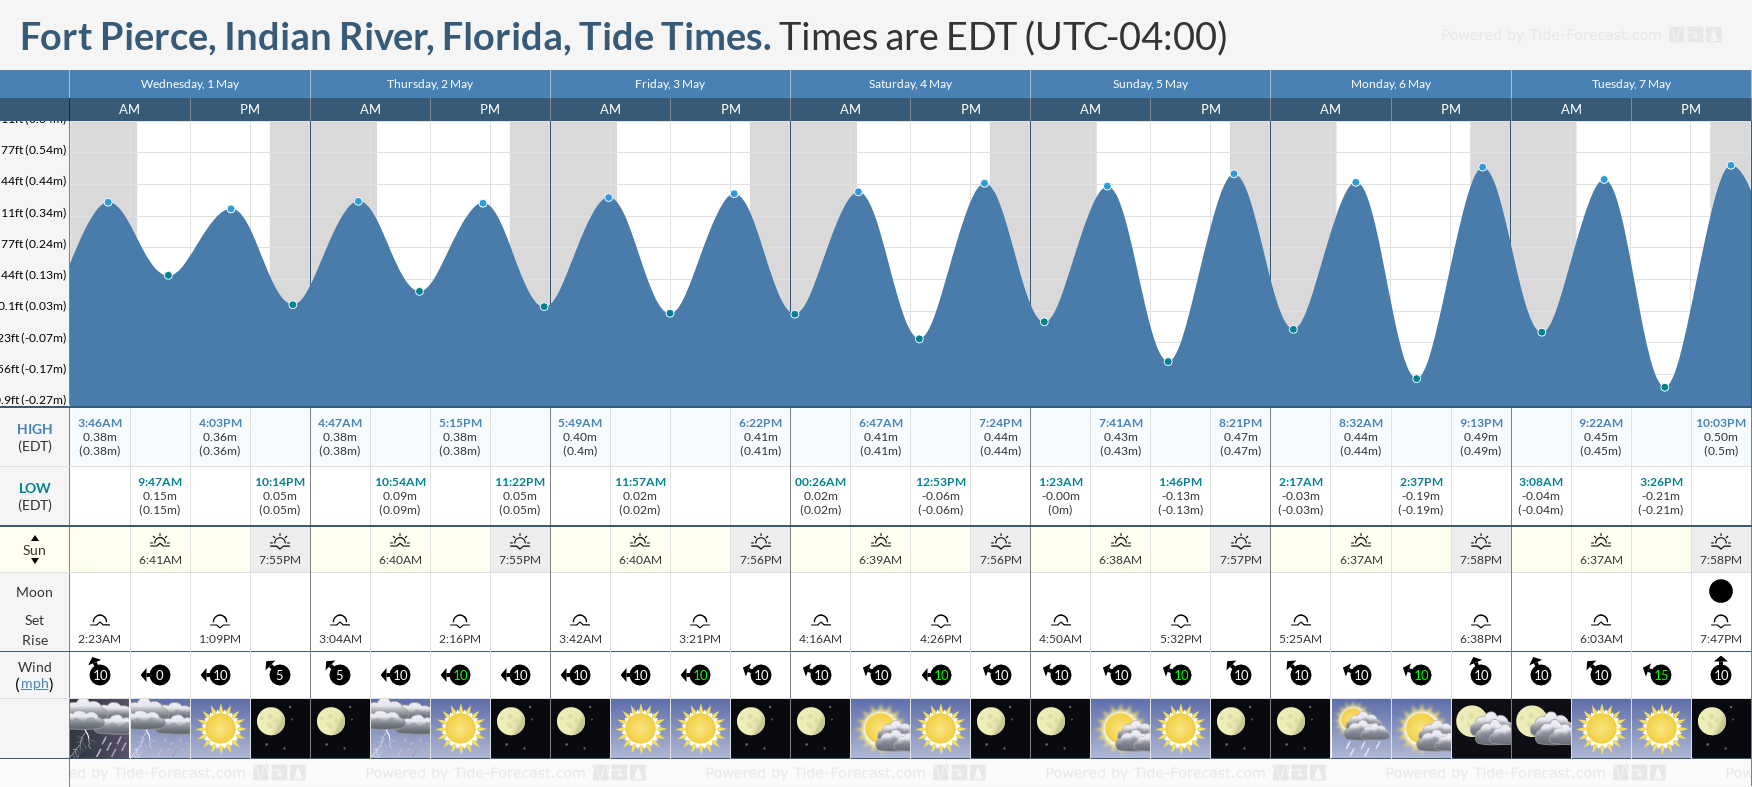 Fort Pierce, Indian River, Florida Tide Chart including high and low tide tide times for the next 7 days